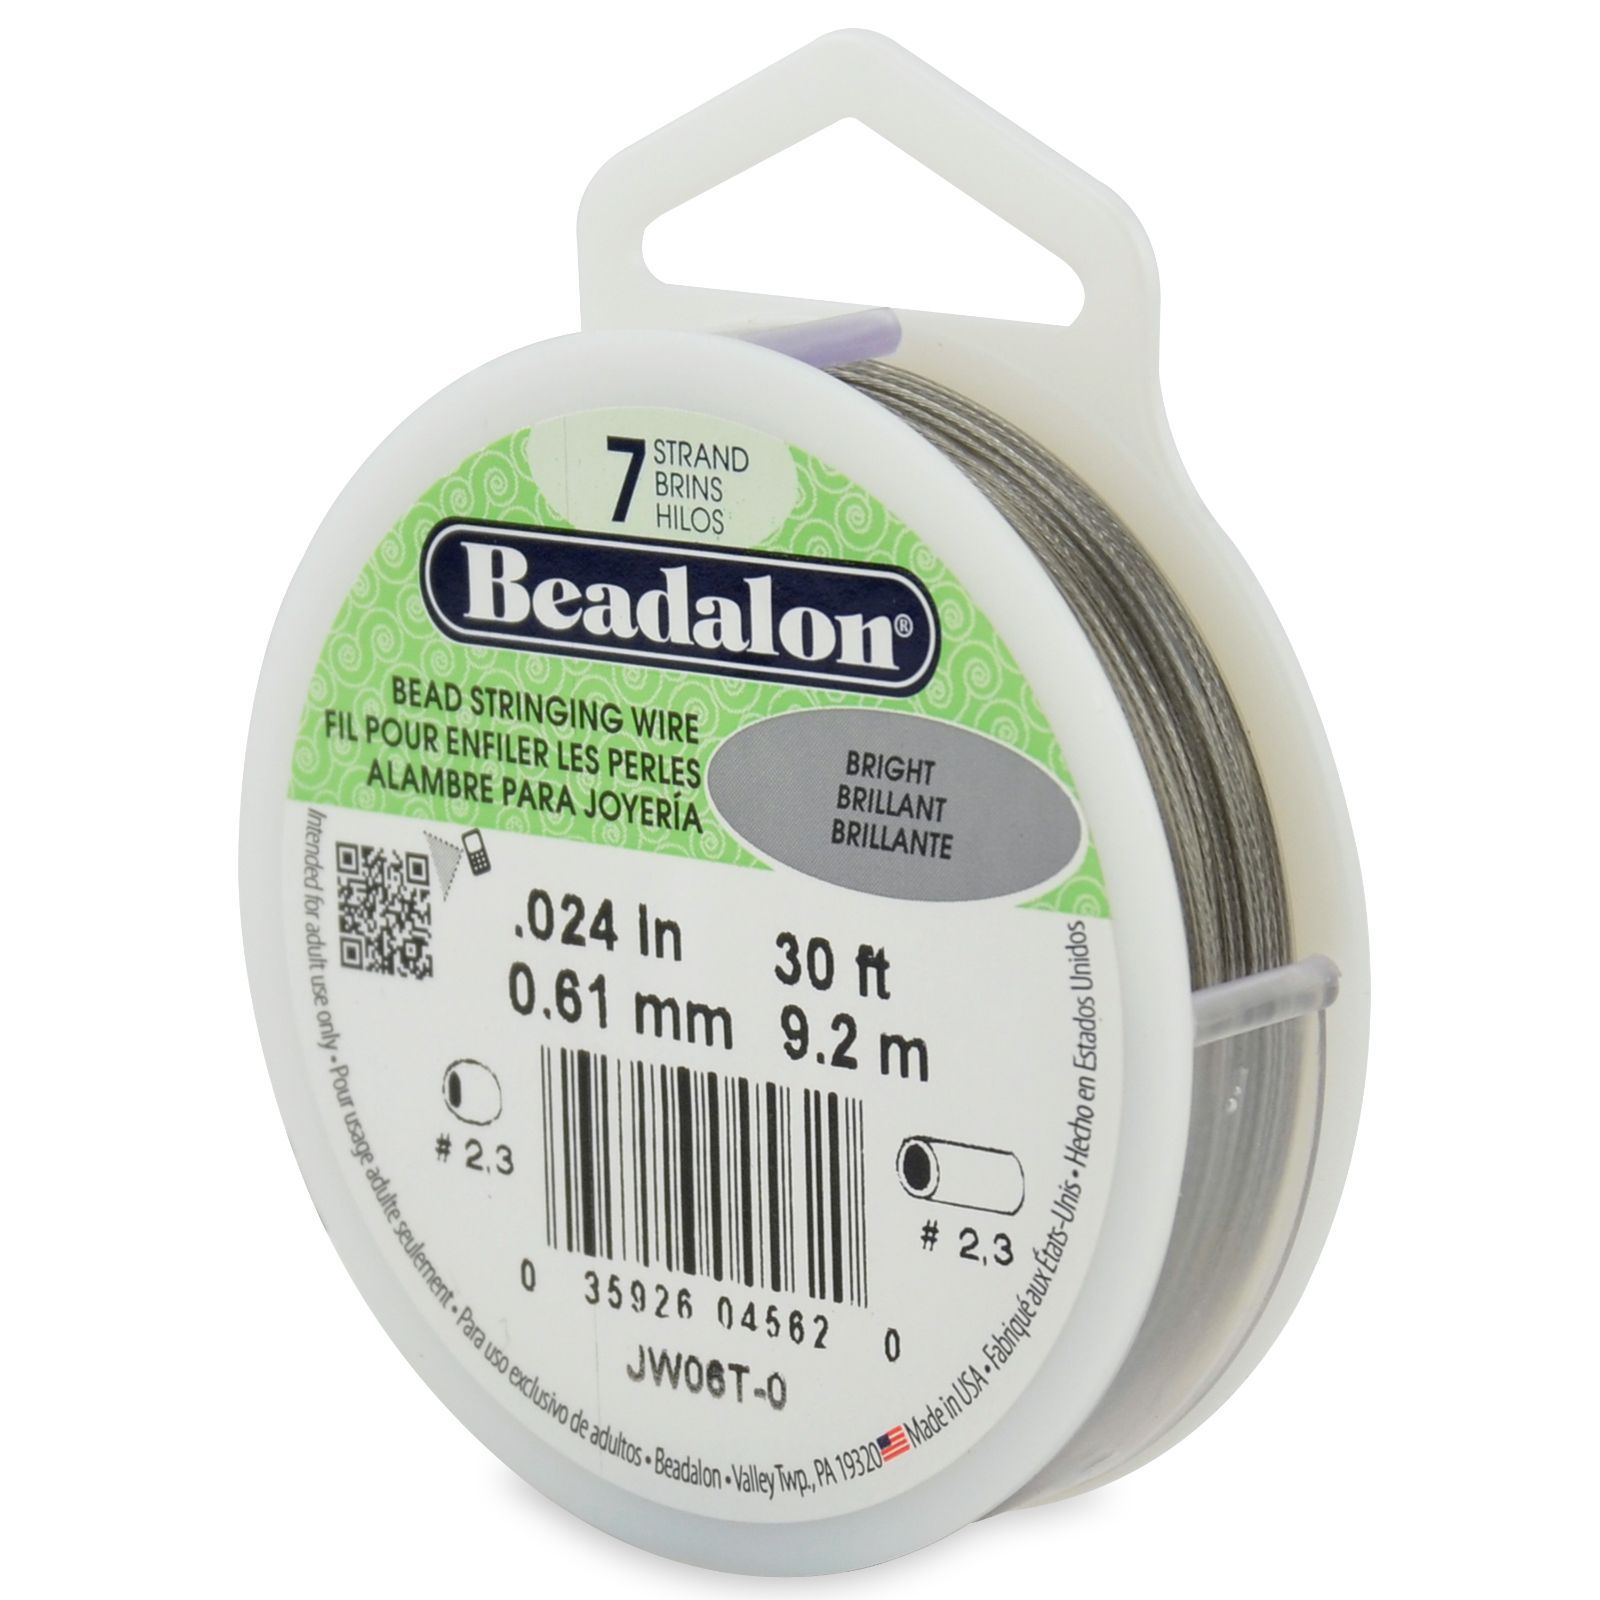 Beadalon Bead Stringing Wire. 30 FT Spool. Color is BRIGHT Sizes